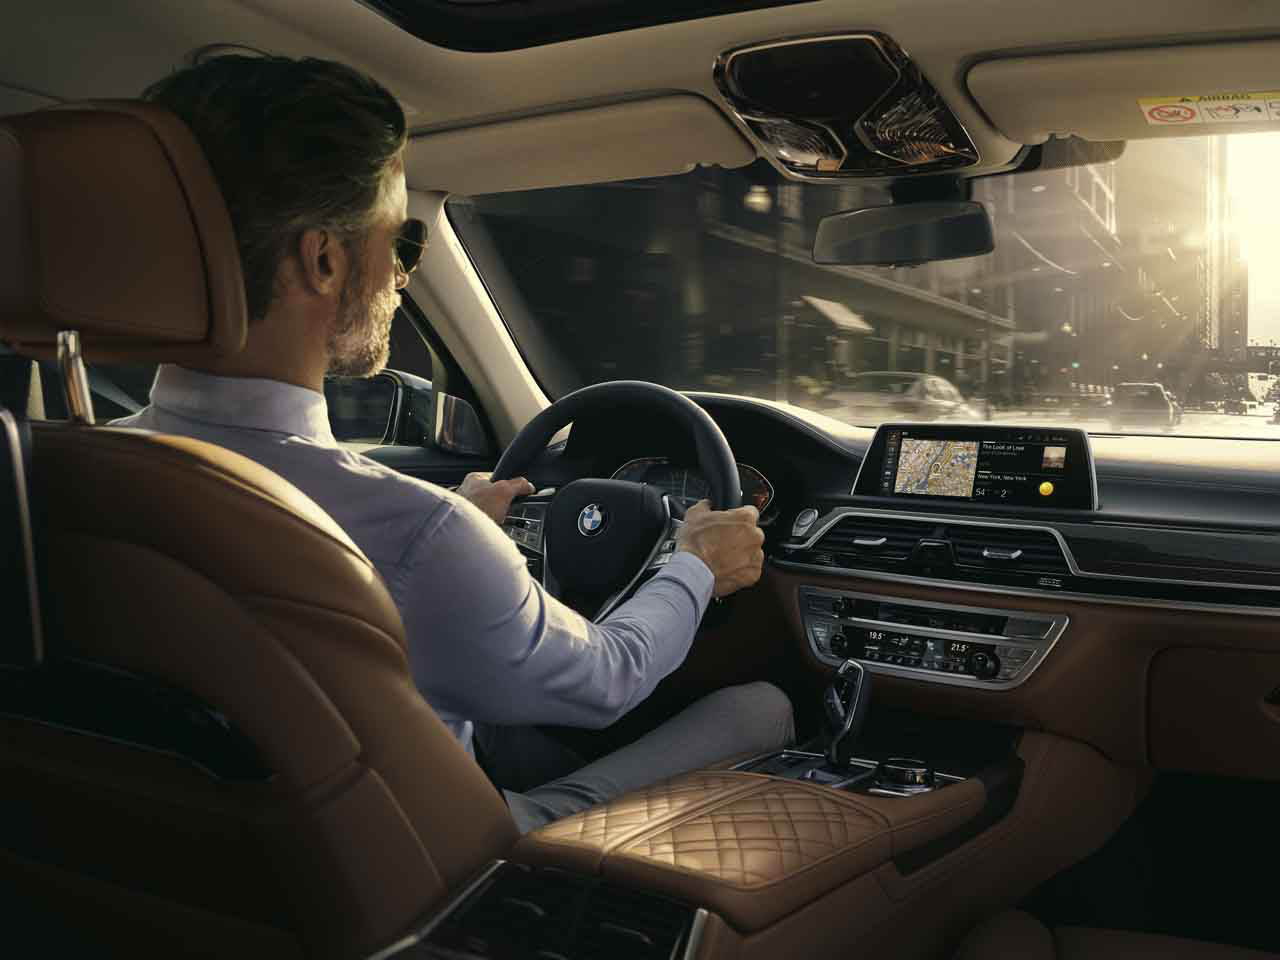 The new BMW 7 Series is about to hit the market with ten highlights showing modern luxury